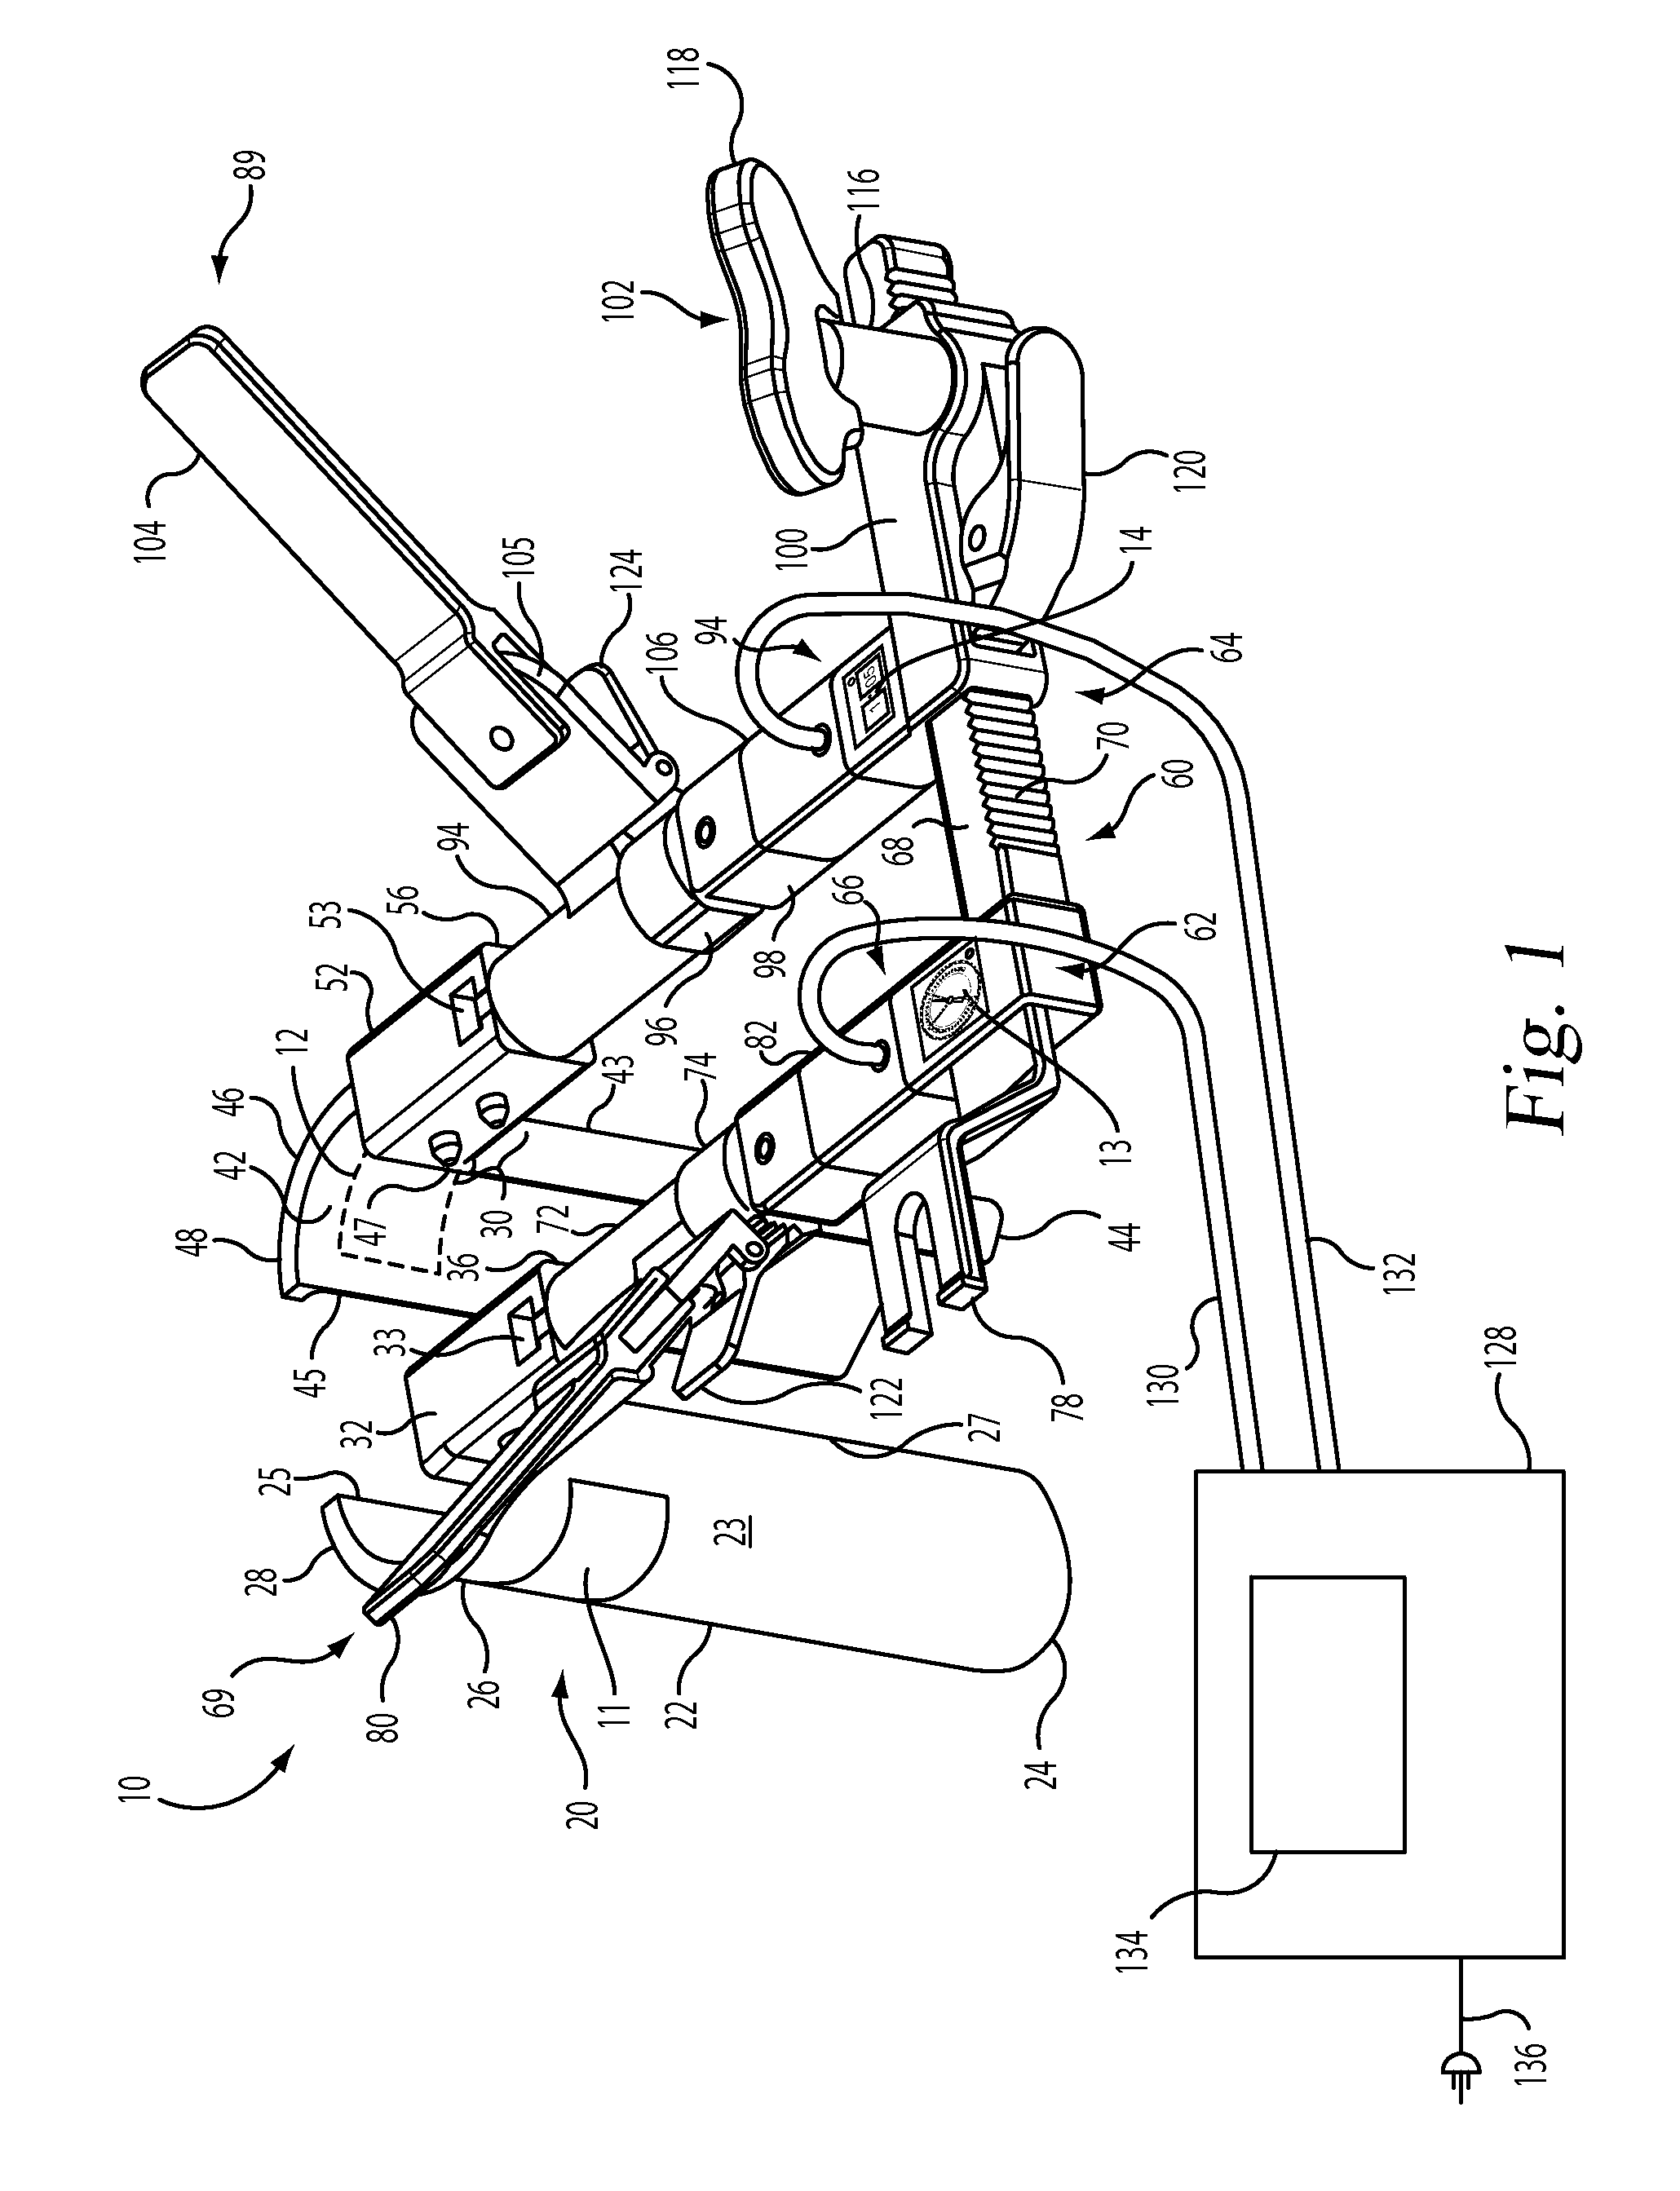 Surgical retractor instrument systems and methods of using the same